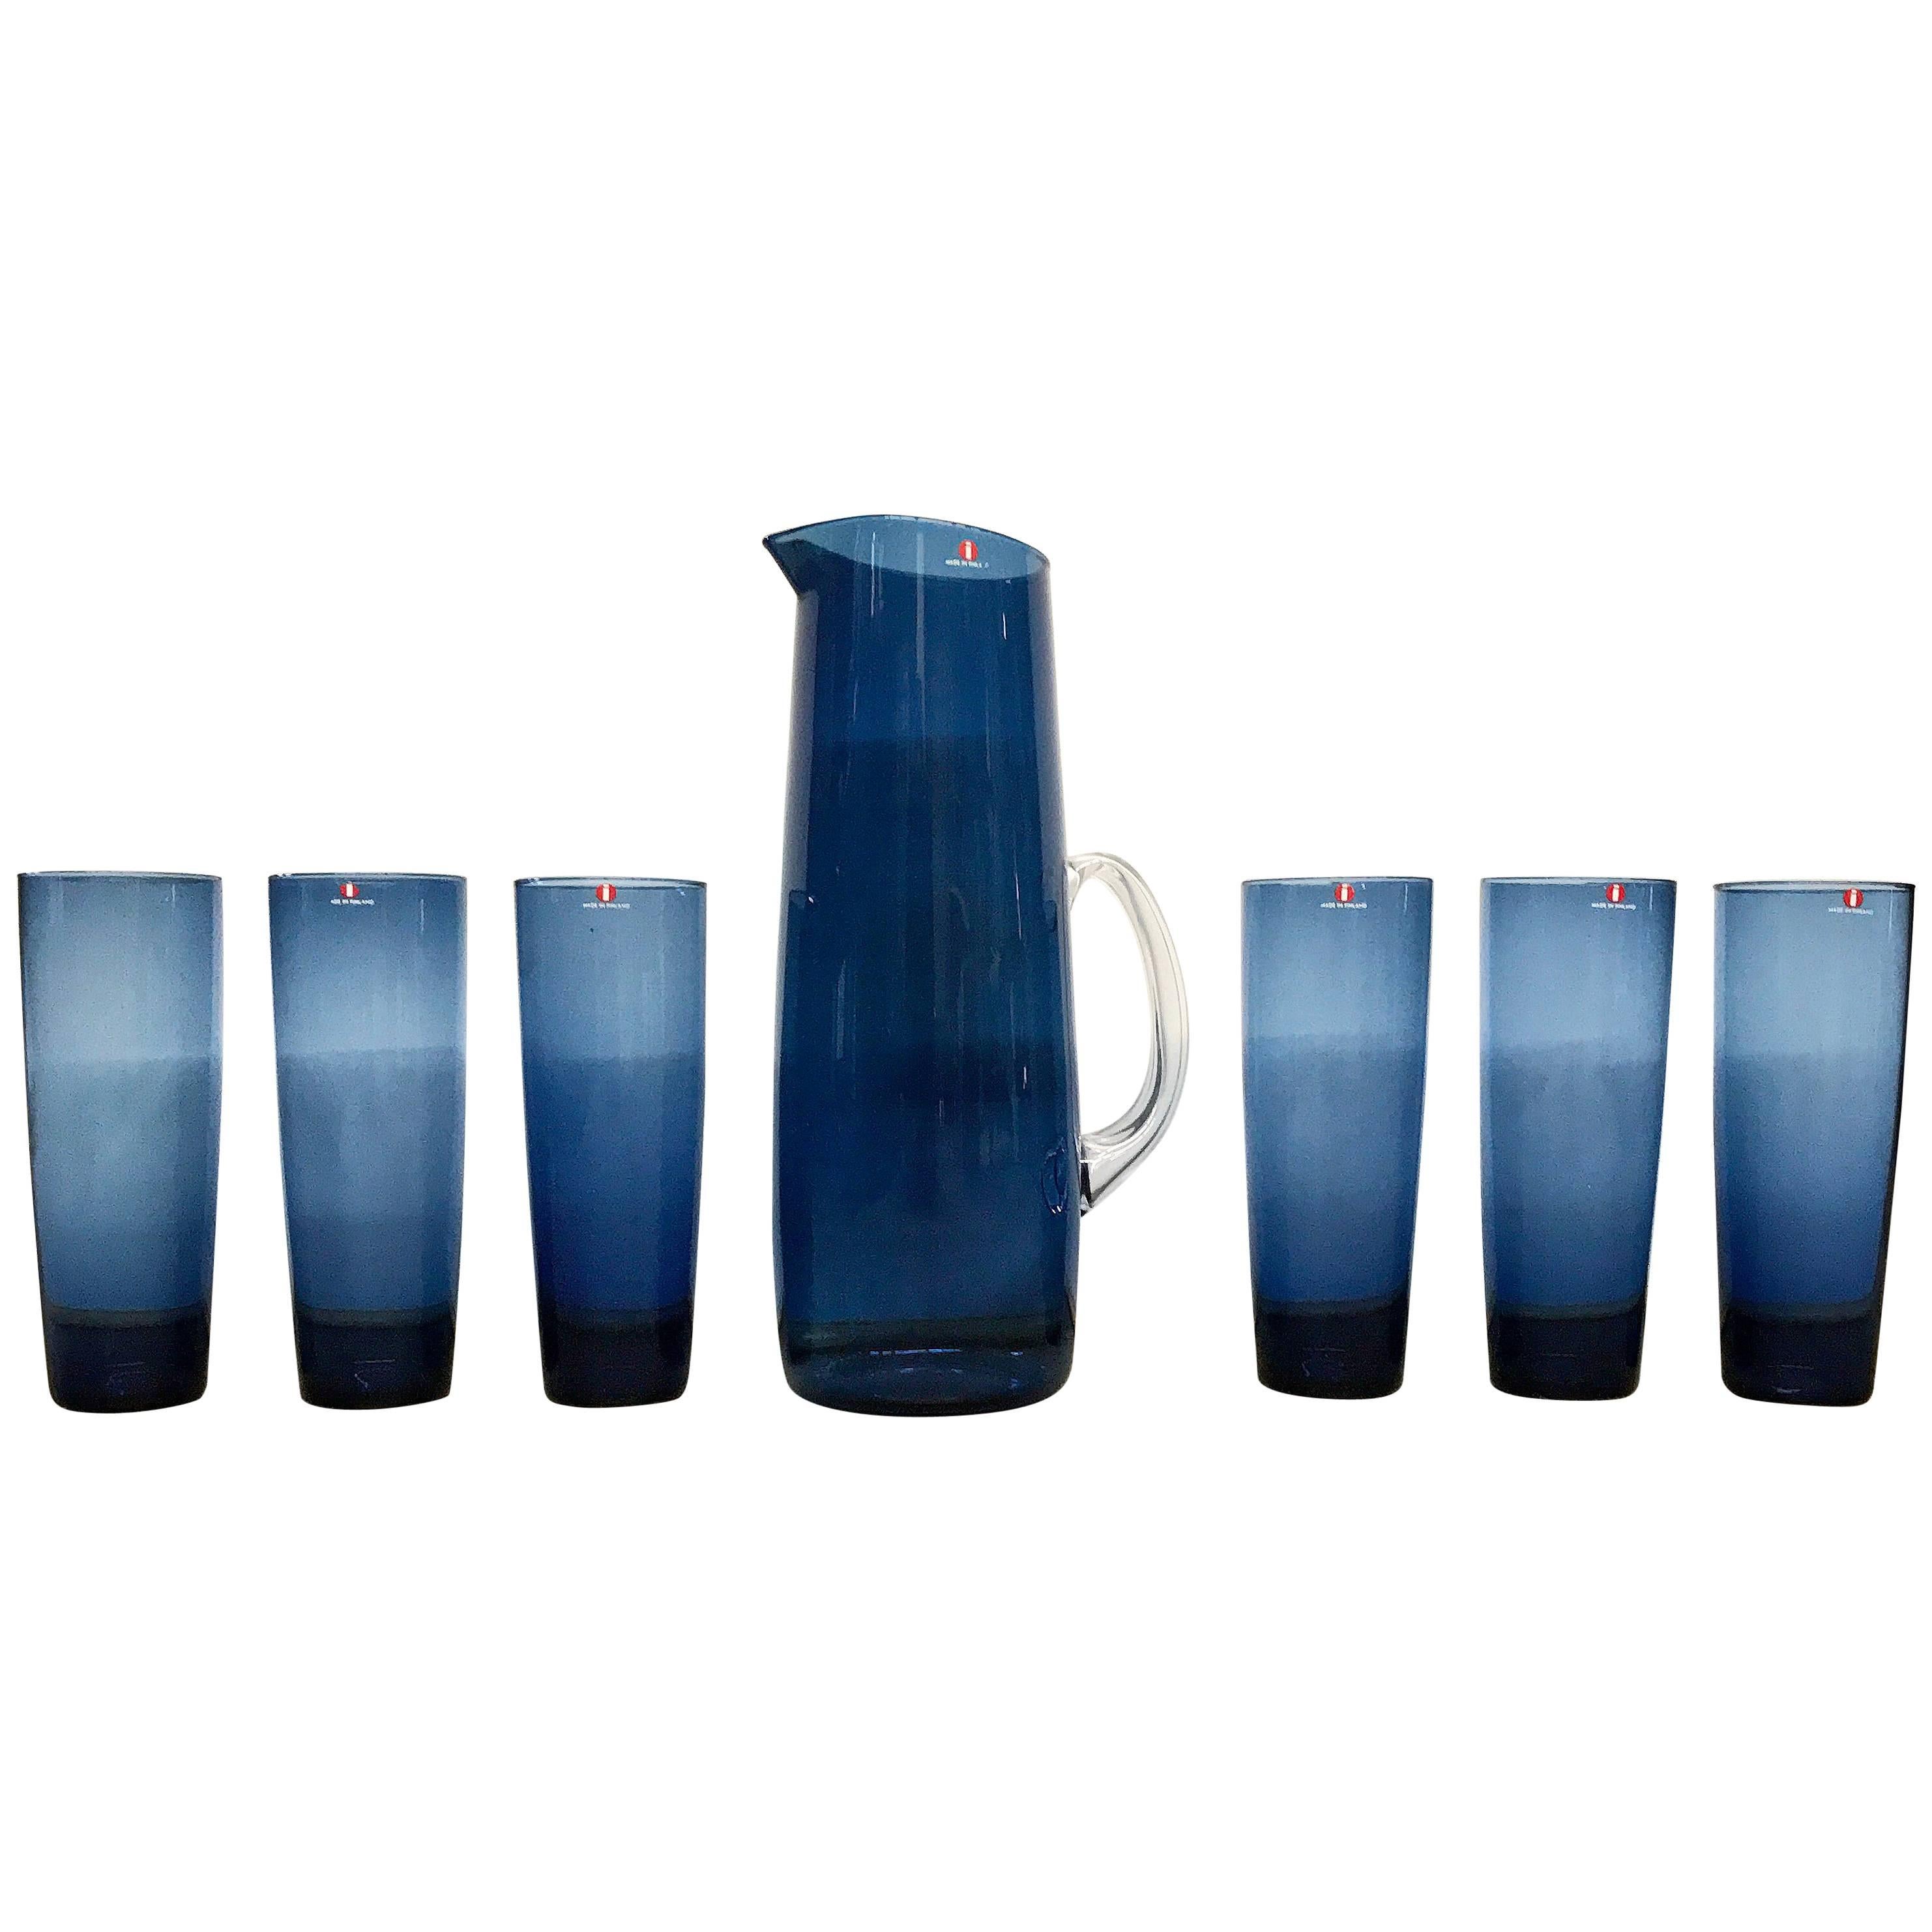 Vintage Timo Sarpaneva for Iittala Pitcher and Glass Set in Blue